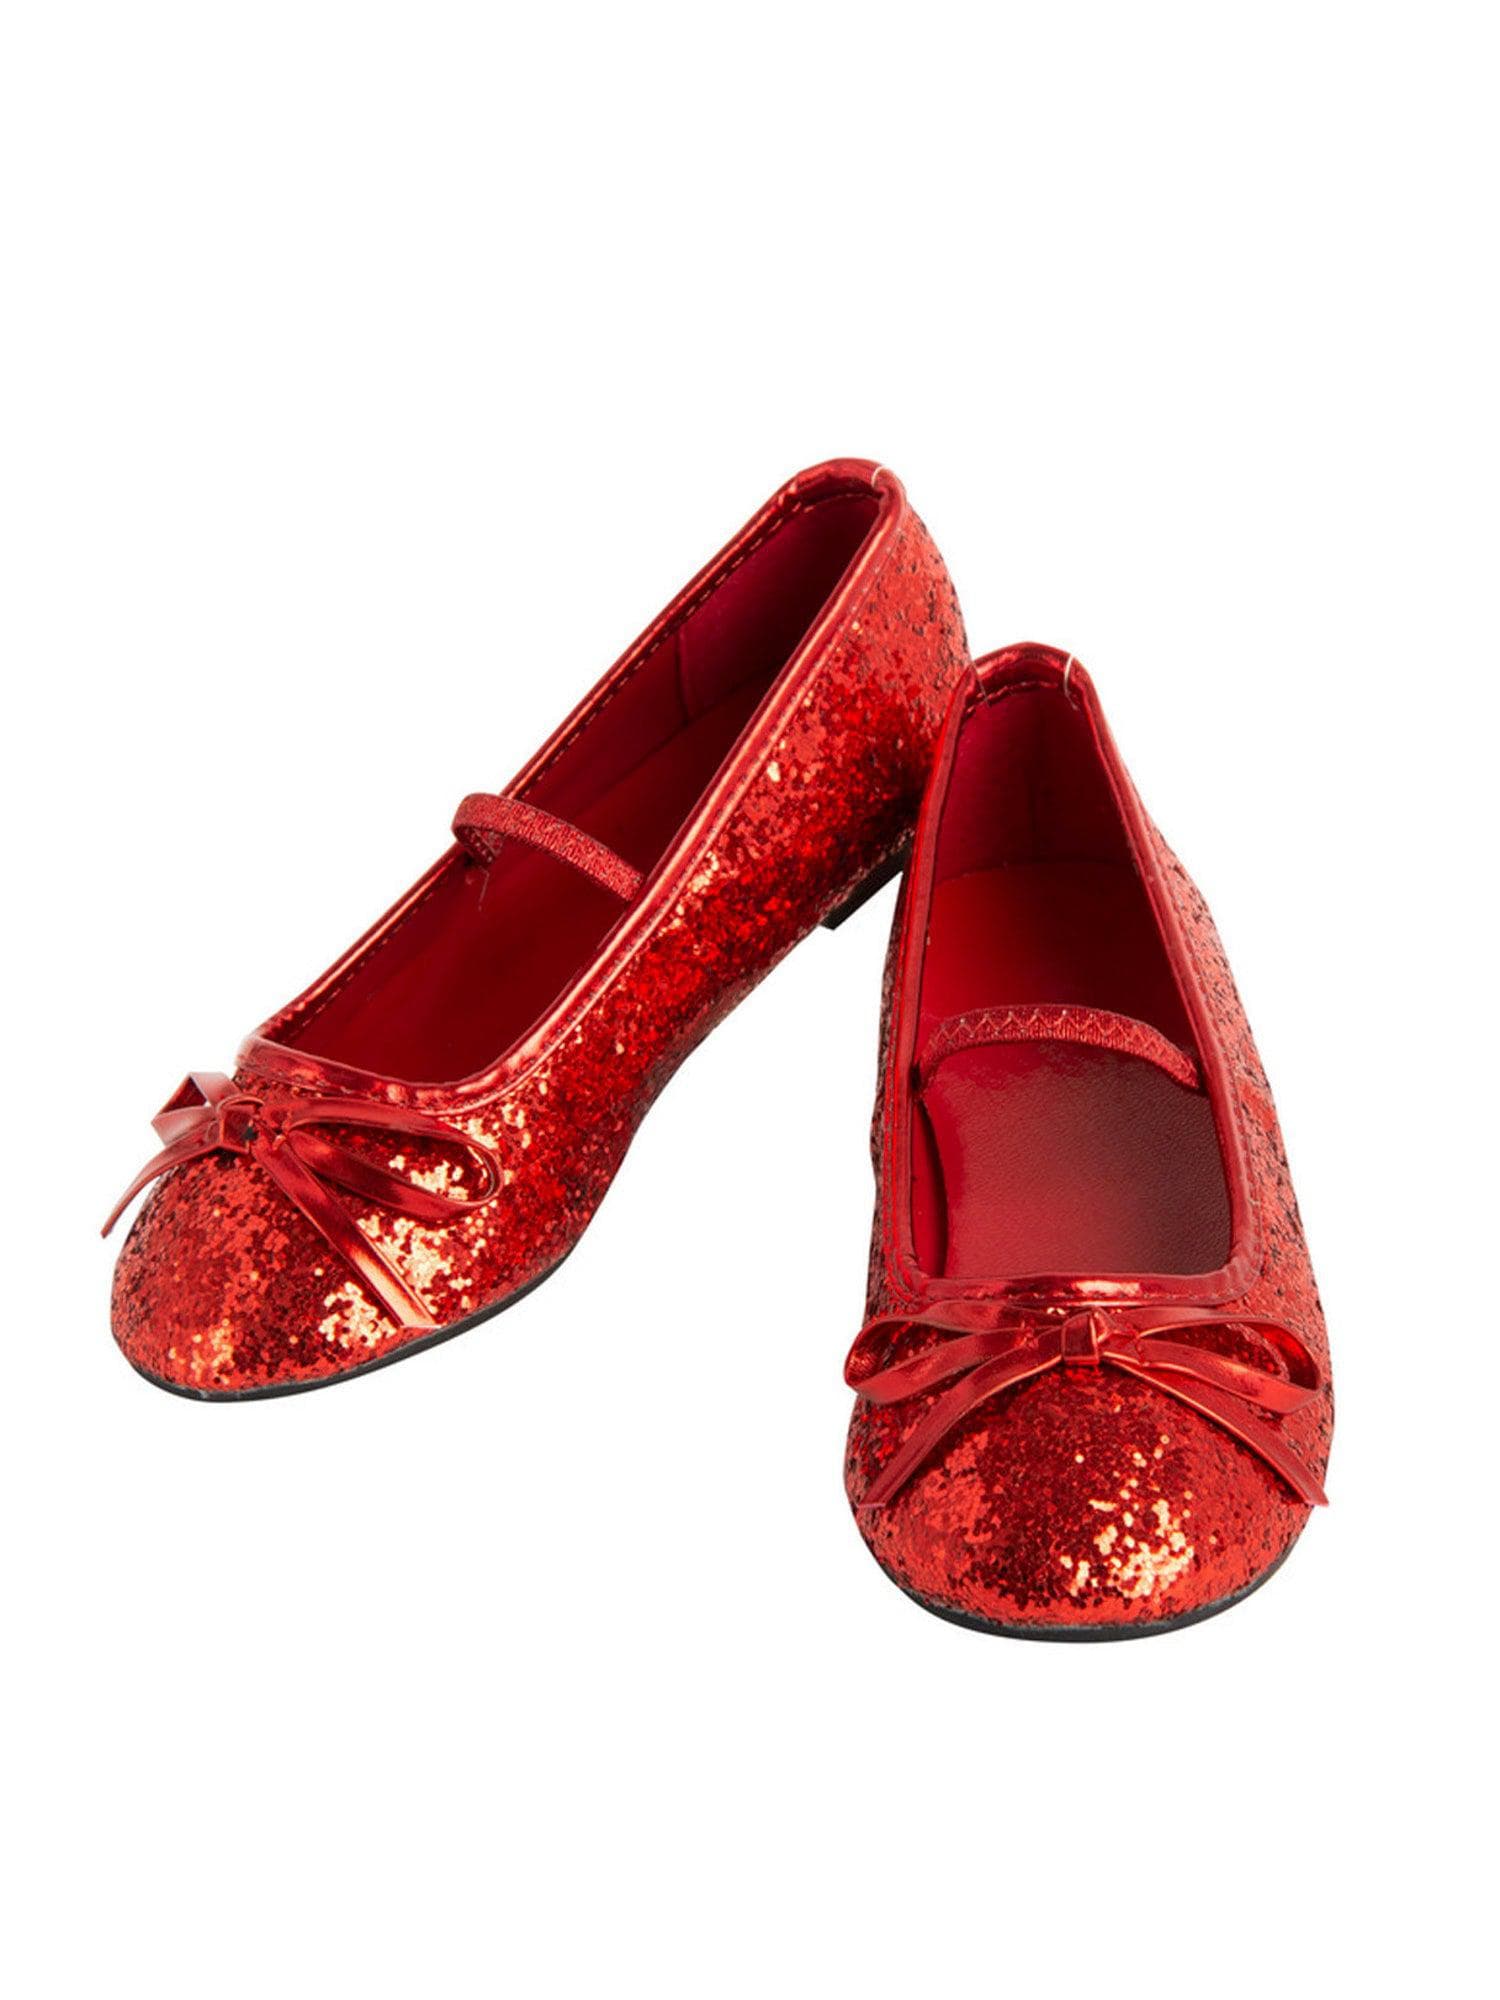 Kids Red Glitter Ballet Shoes - costumes.com